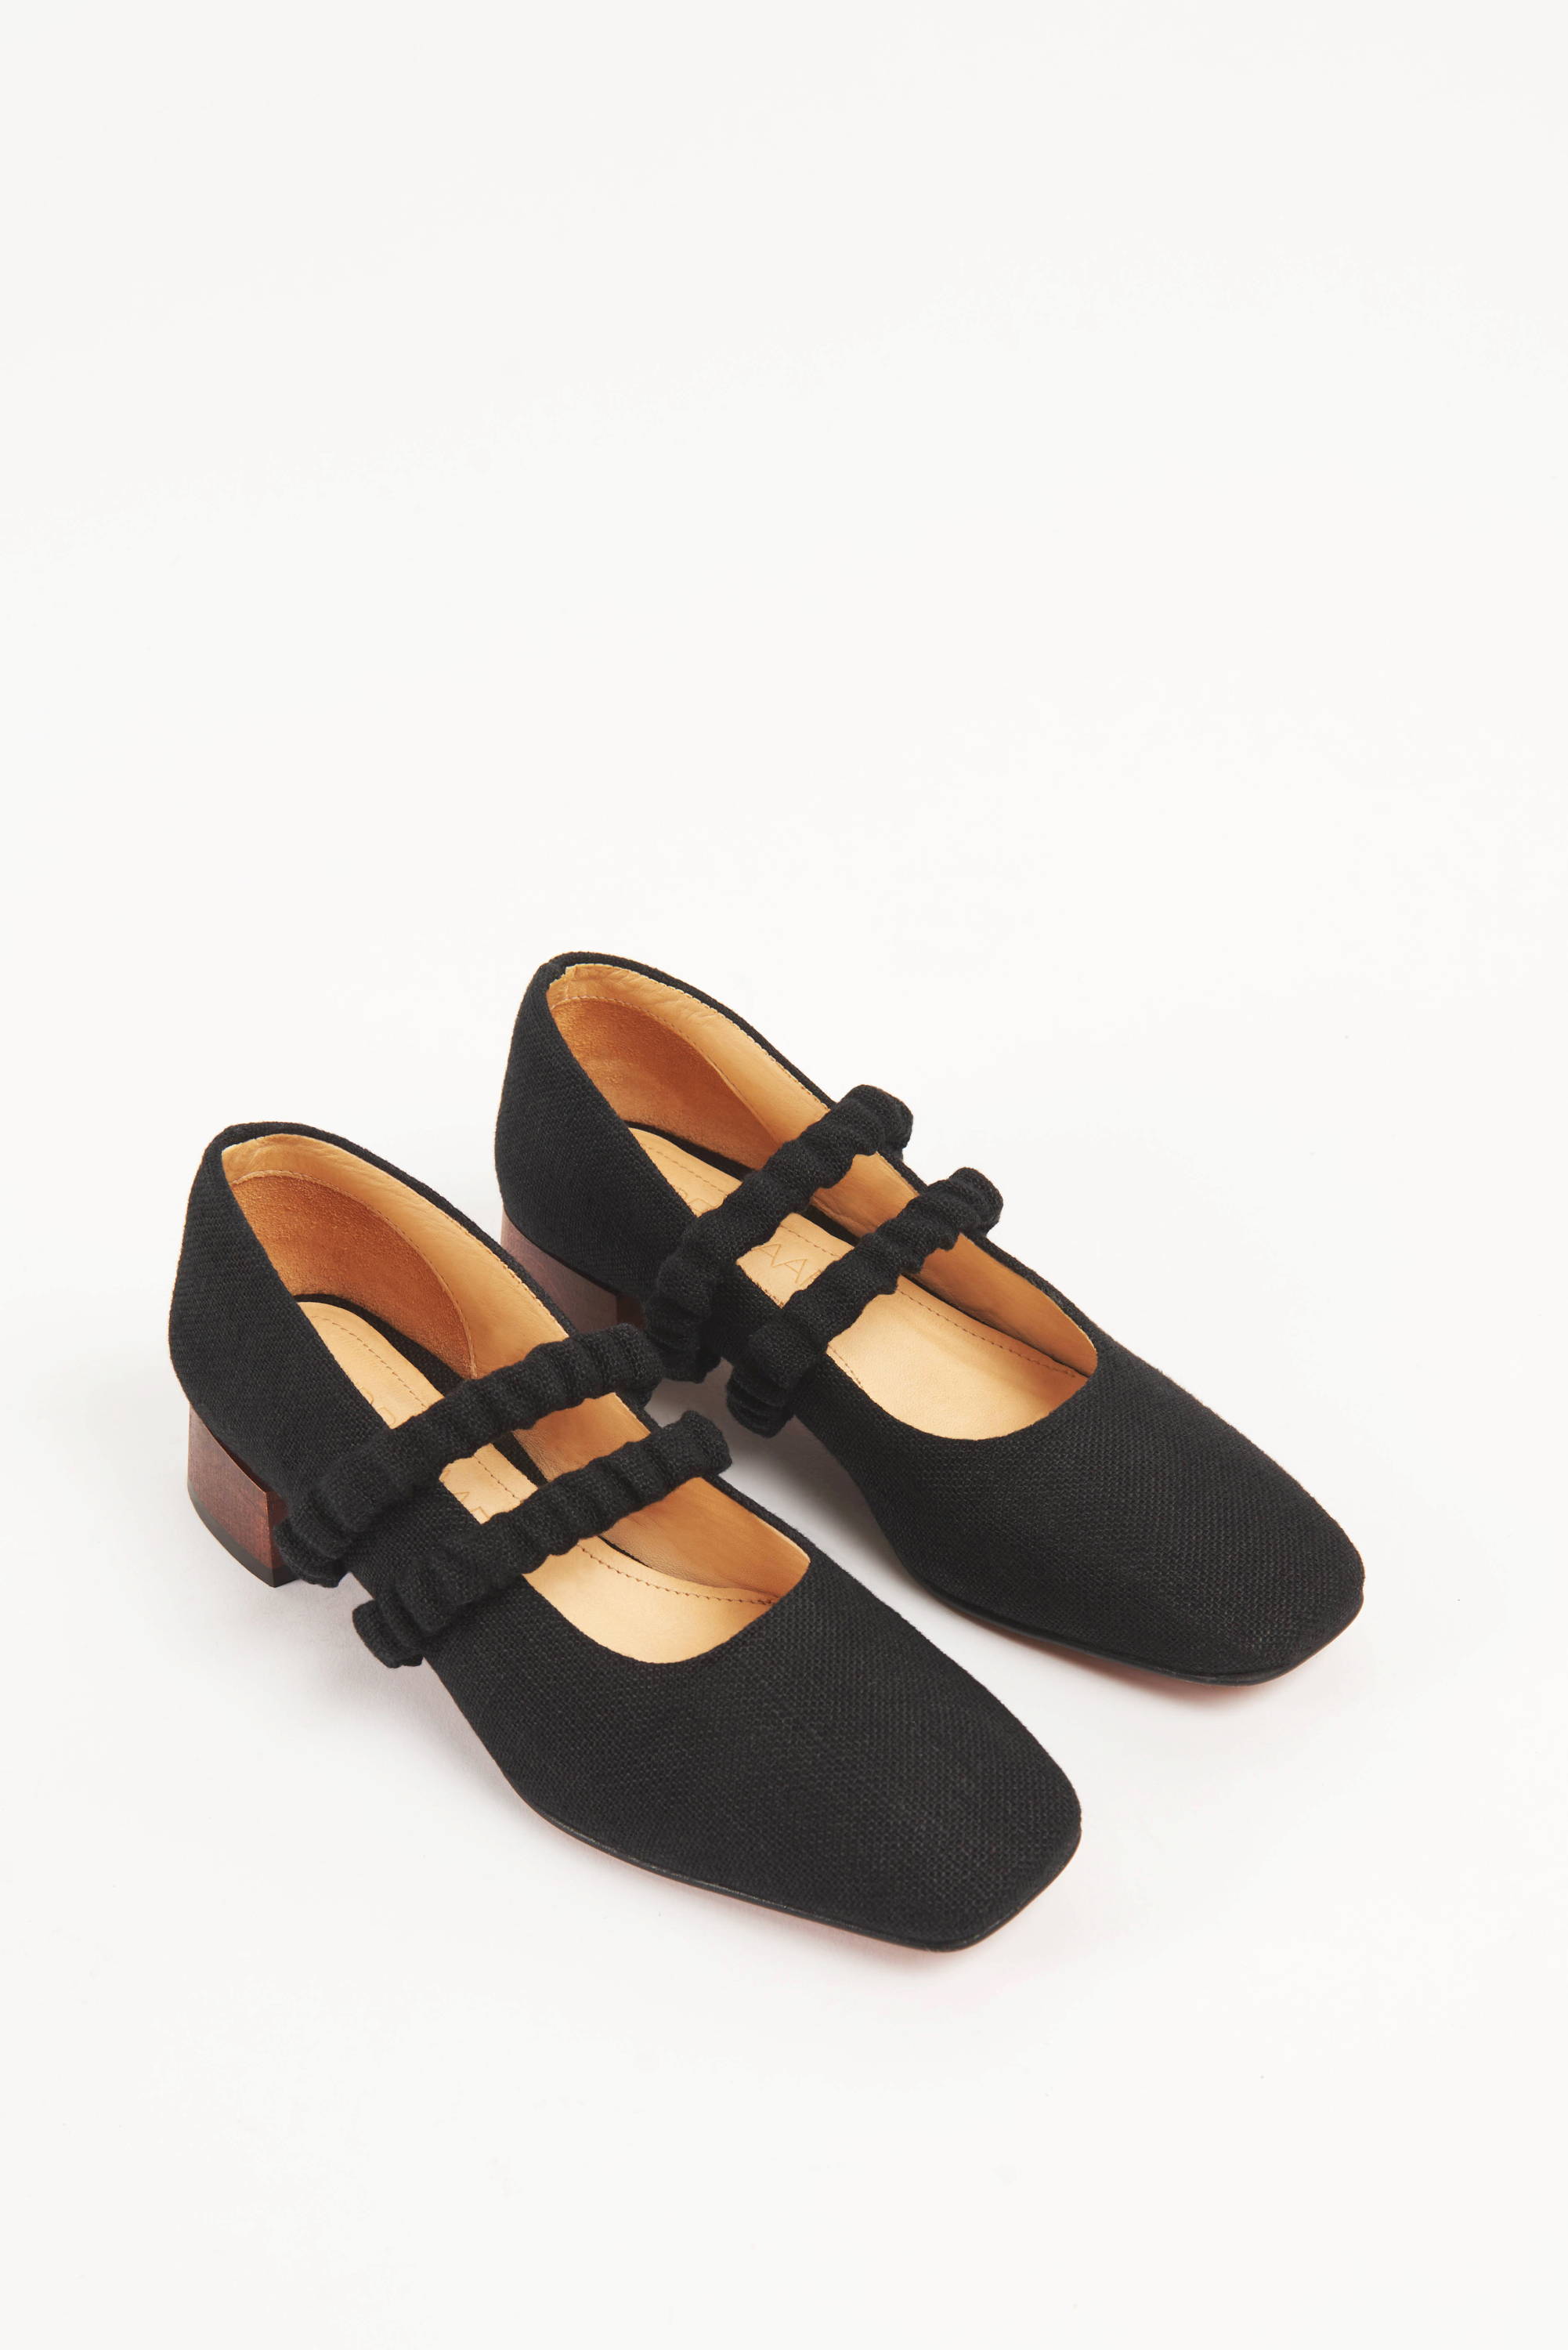 Vandrelaar Ruth mary-jane pump in black linen with a wooden block mid-heel and two scrunchie elasticated straps 